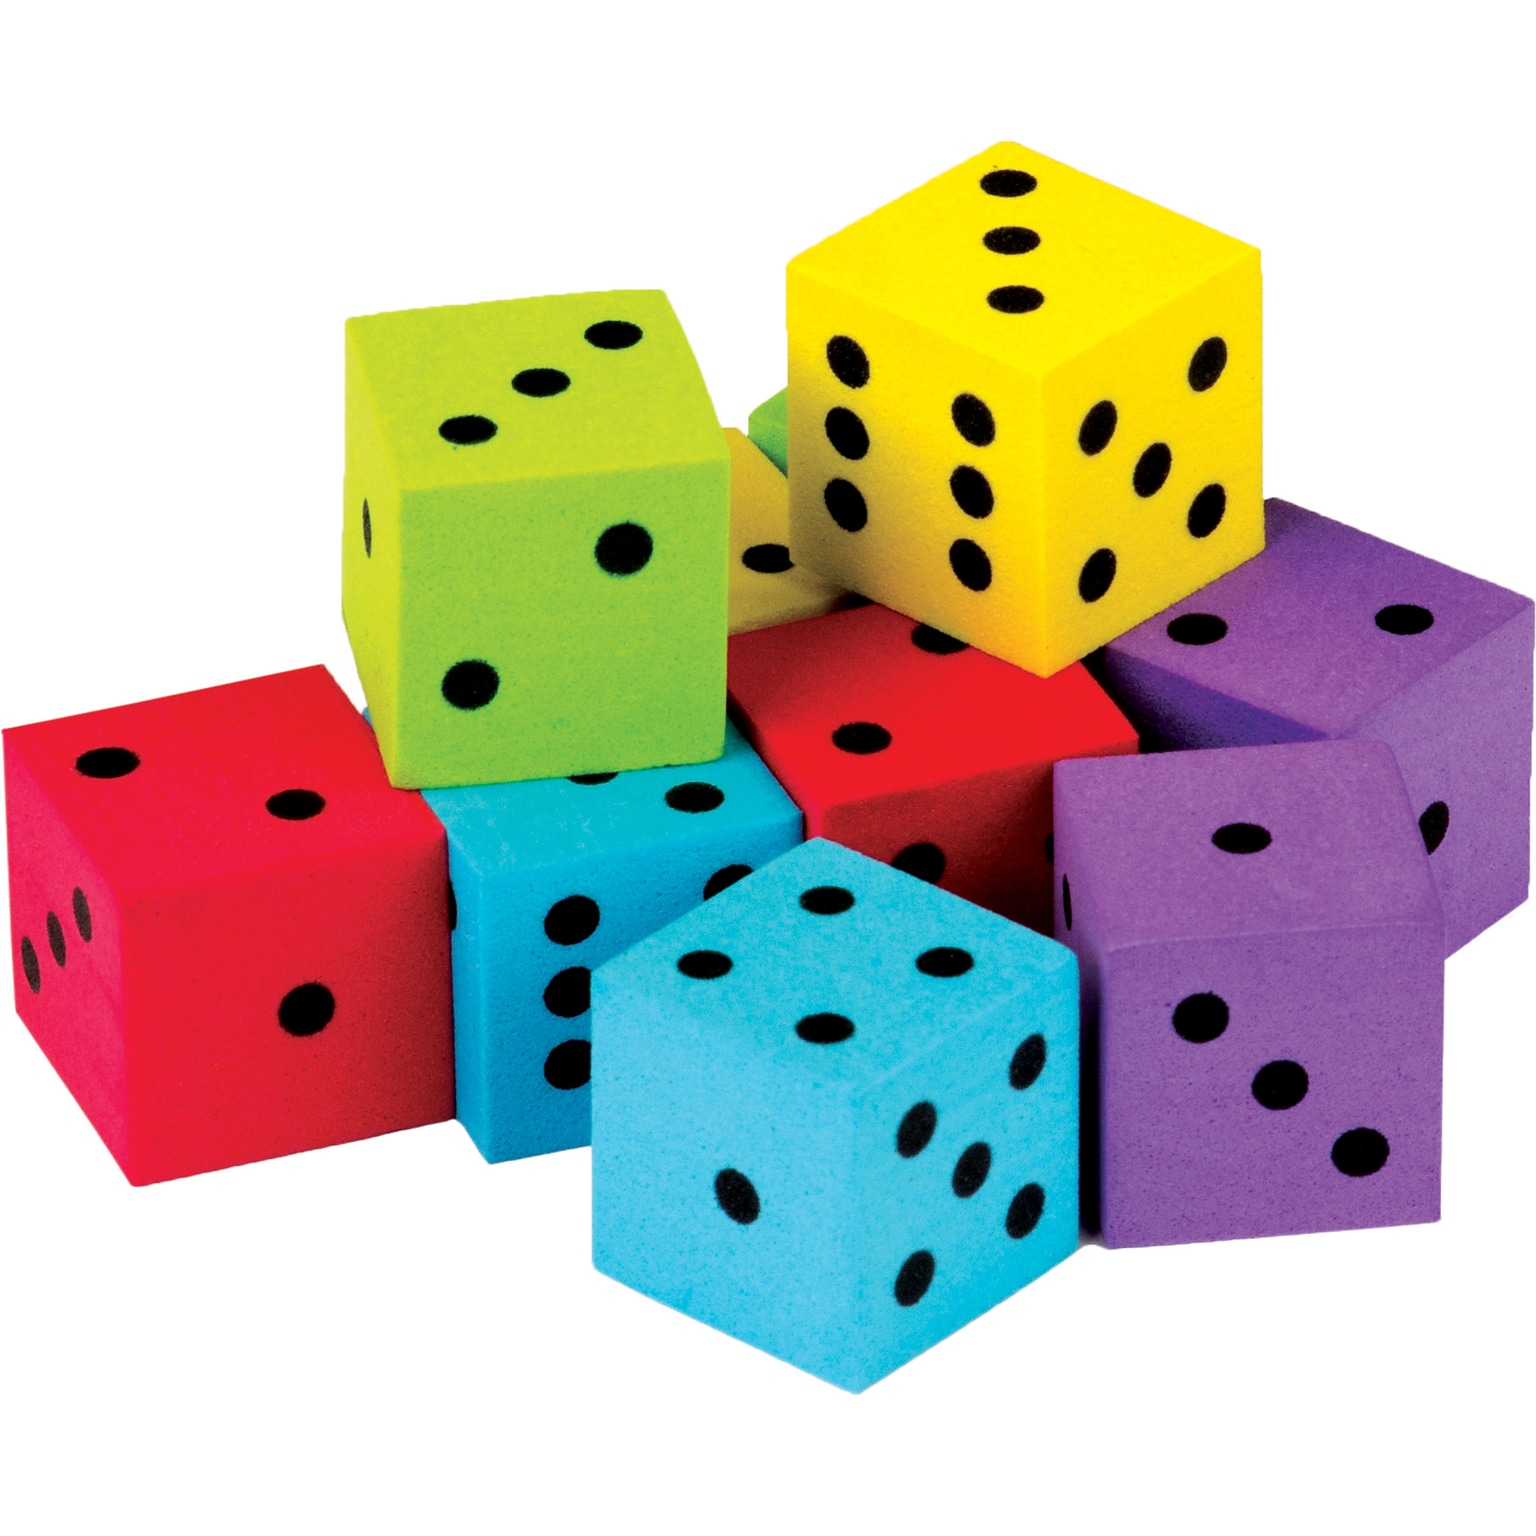 Teacher Created Resources Colorful Foam Dice, 20 Per Pack, 3 Packs (TCR20808)